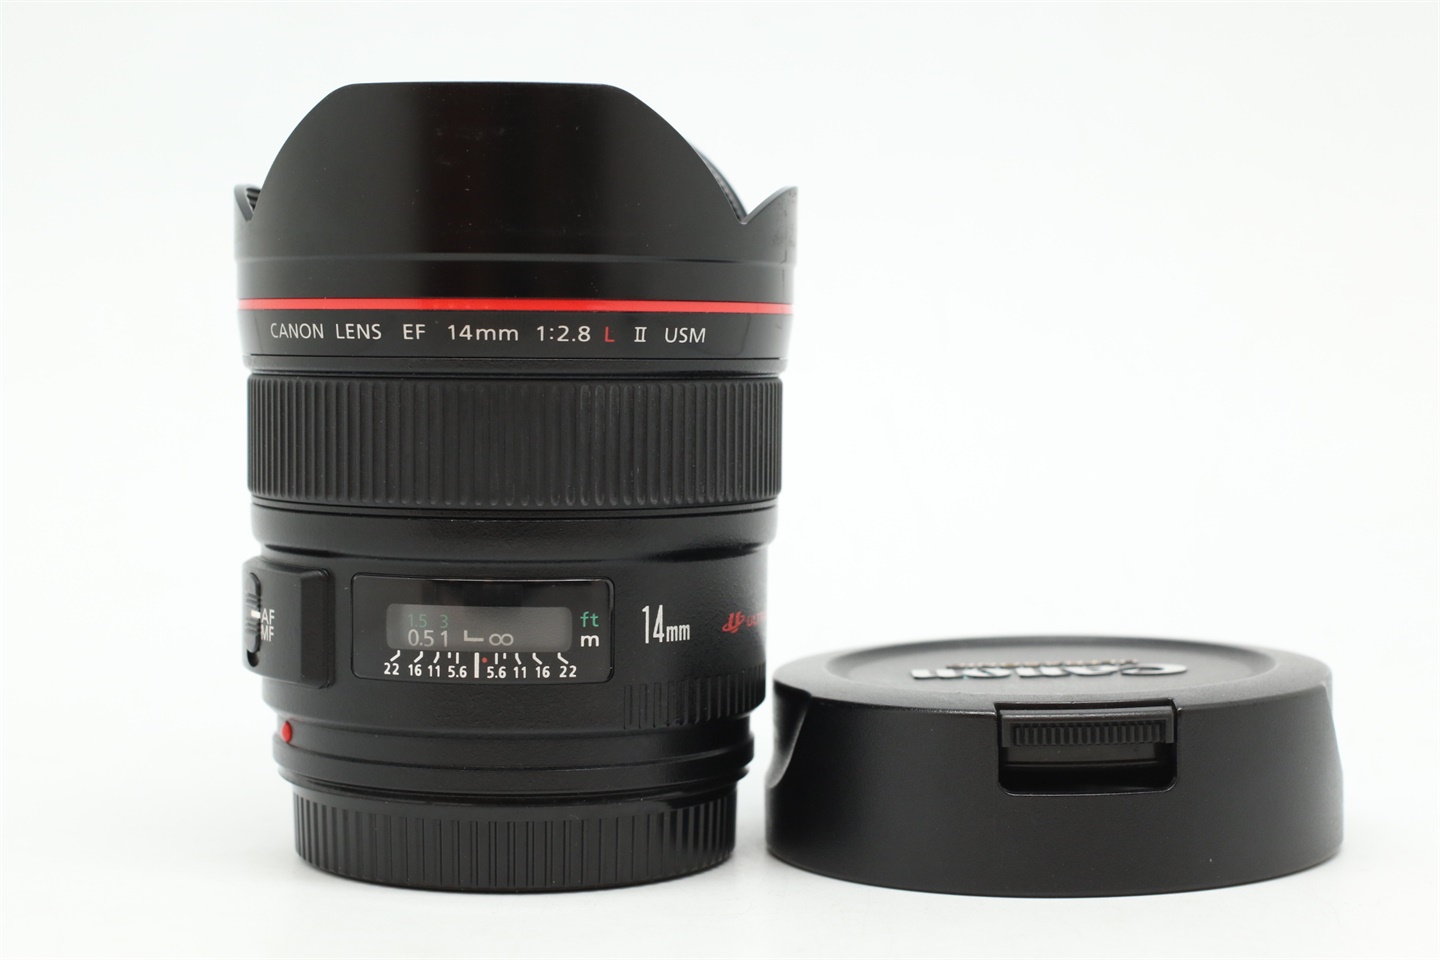 [USED-PUDU] CANON 14MM F2.8 L II EF USM LENS 90%LIKE NEW CONDITION SN:1498120